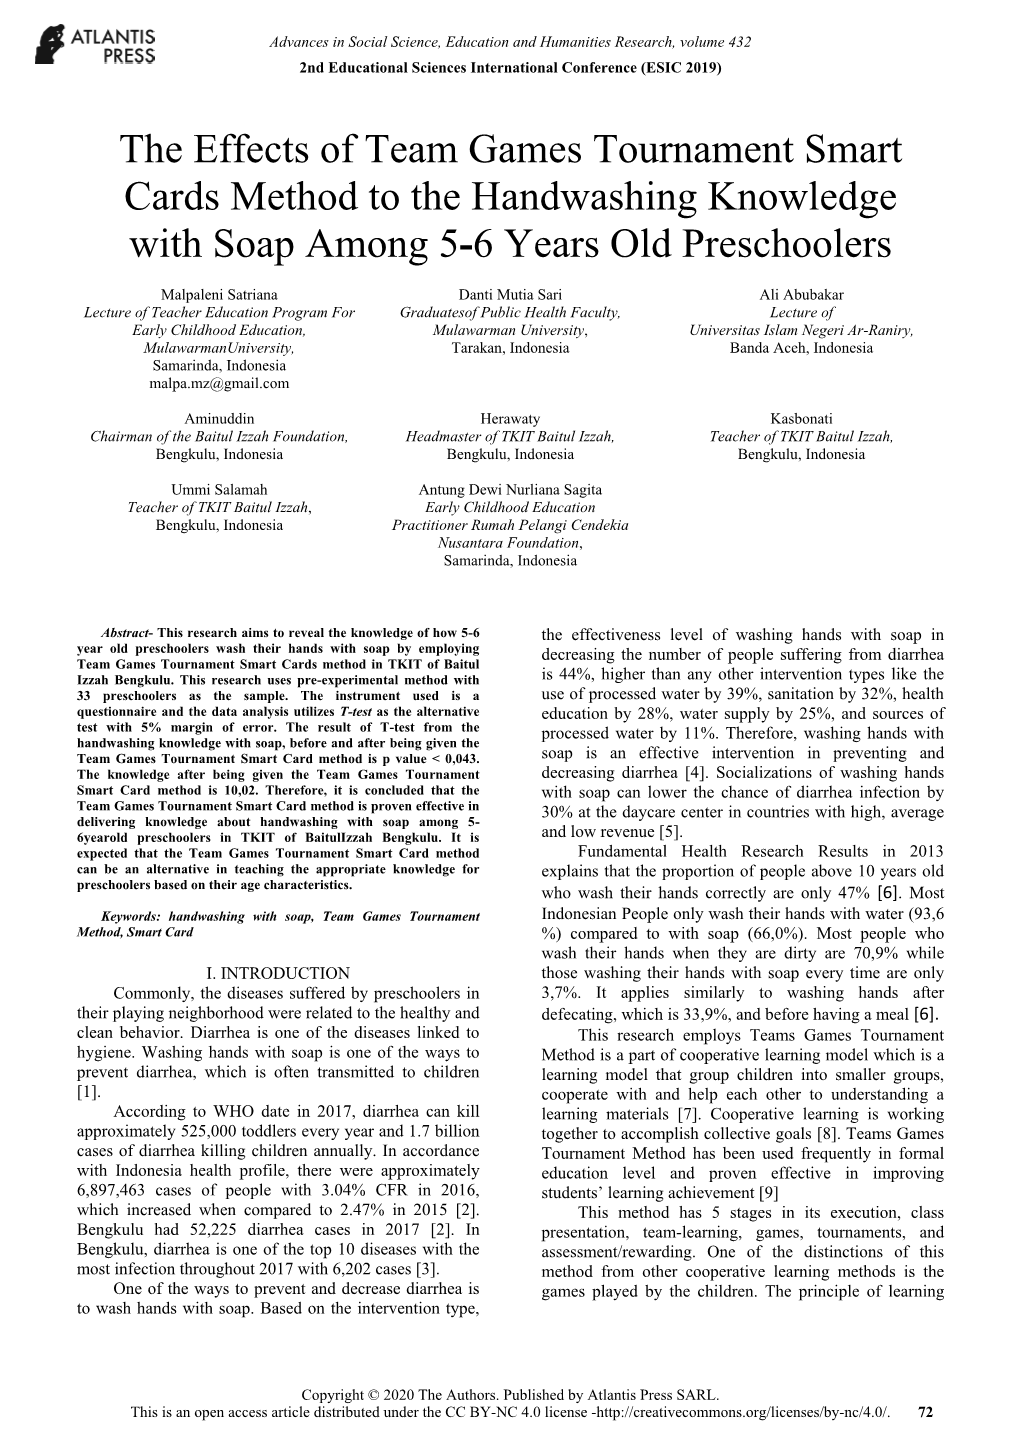 The Effects of Team Games Tournament Smart Cards Method to the Handwashing Knowledge with Soap Among 5-6 Years Old Preschoolers